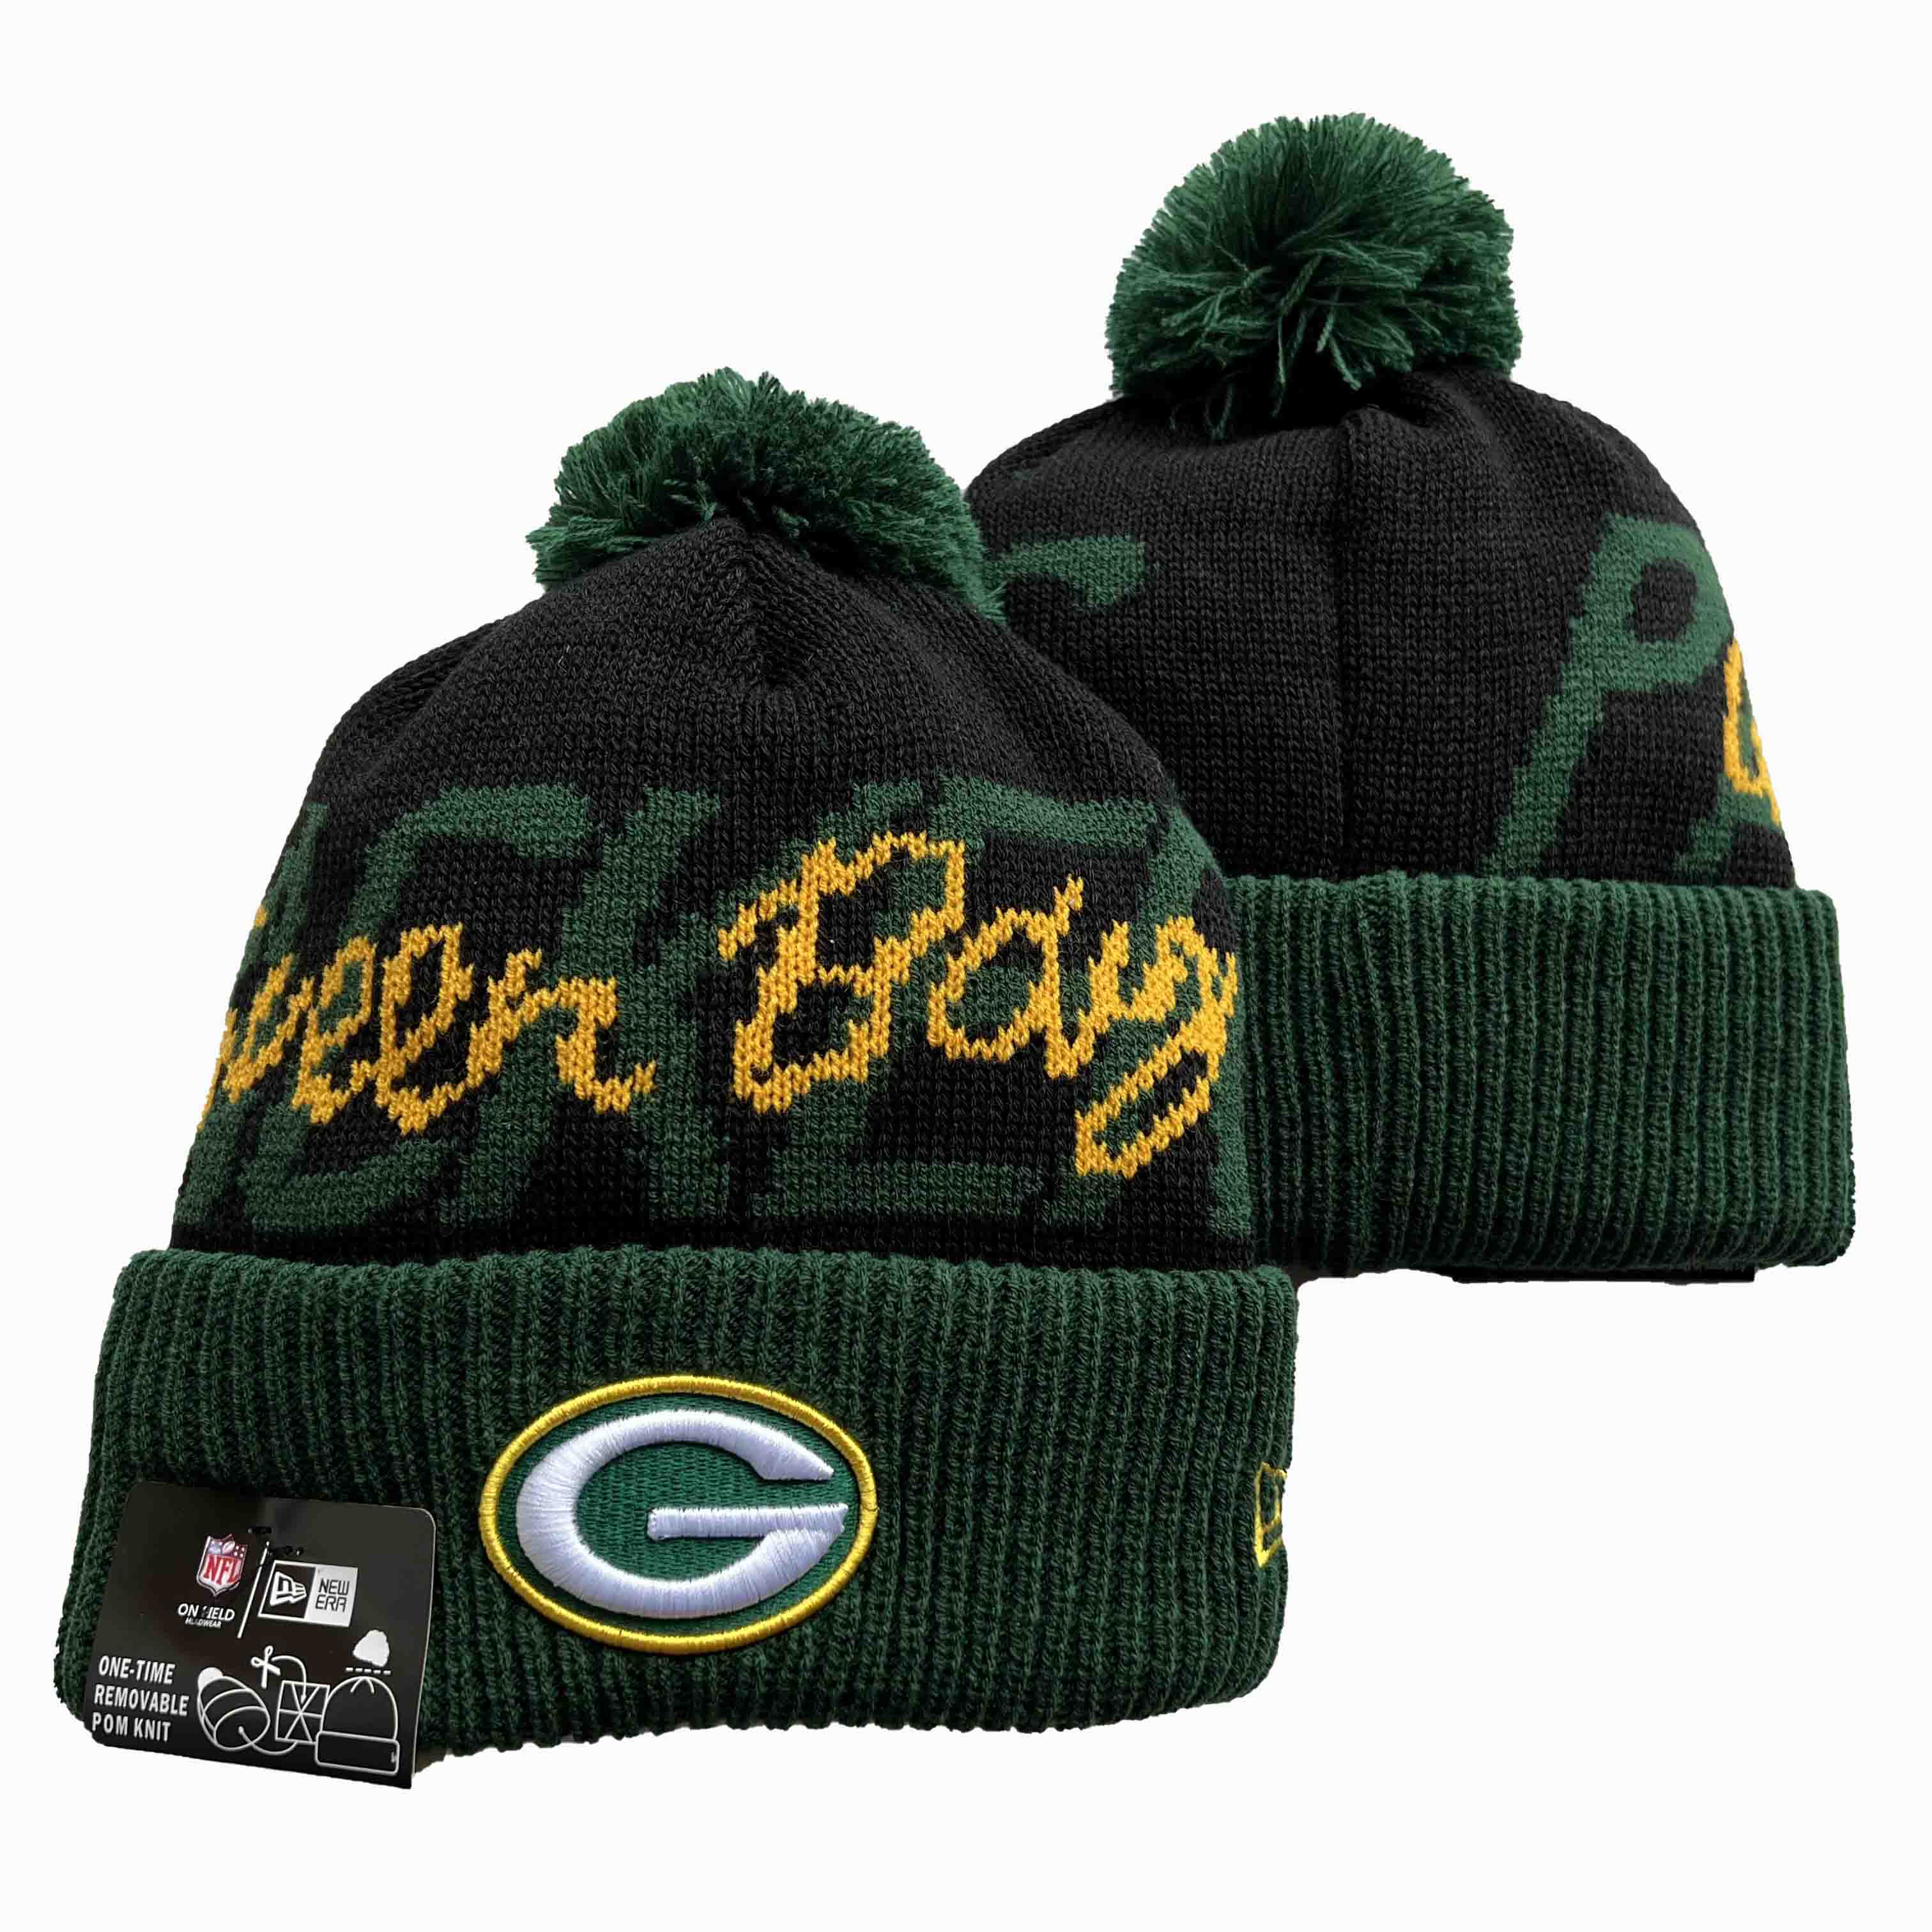 NFL Green Bay Packers Beanies Knit Hats-YD1169